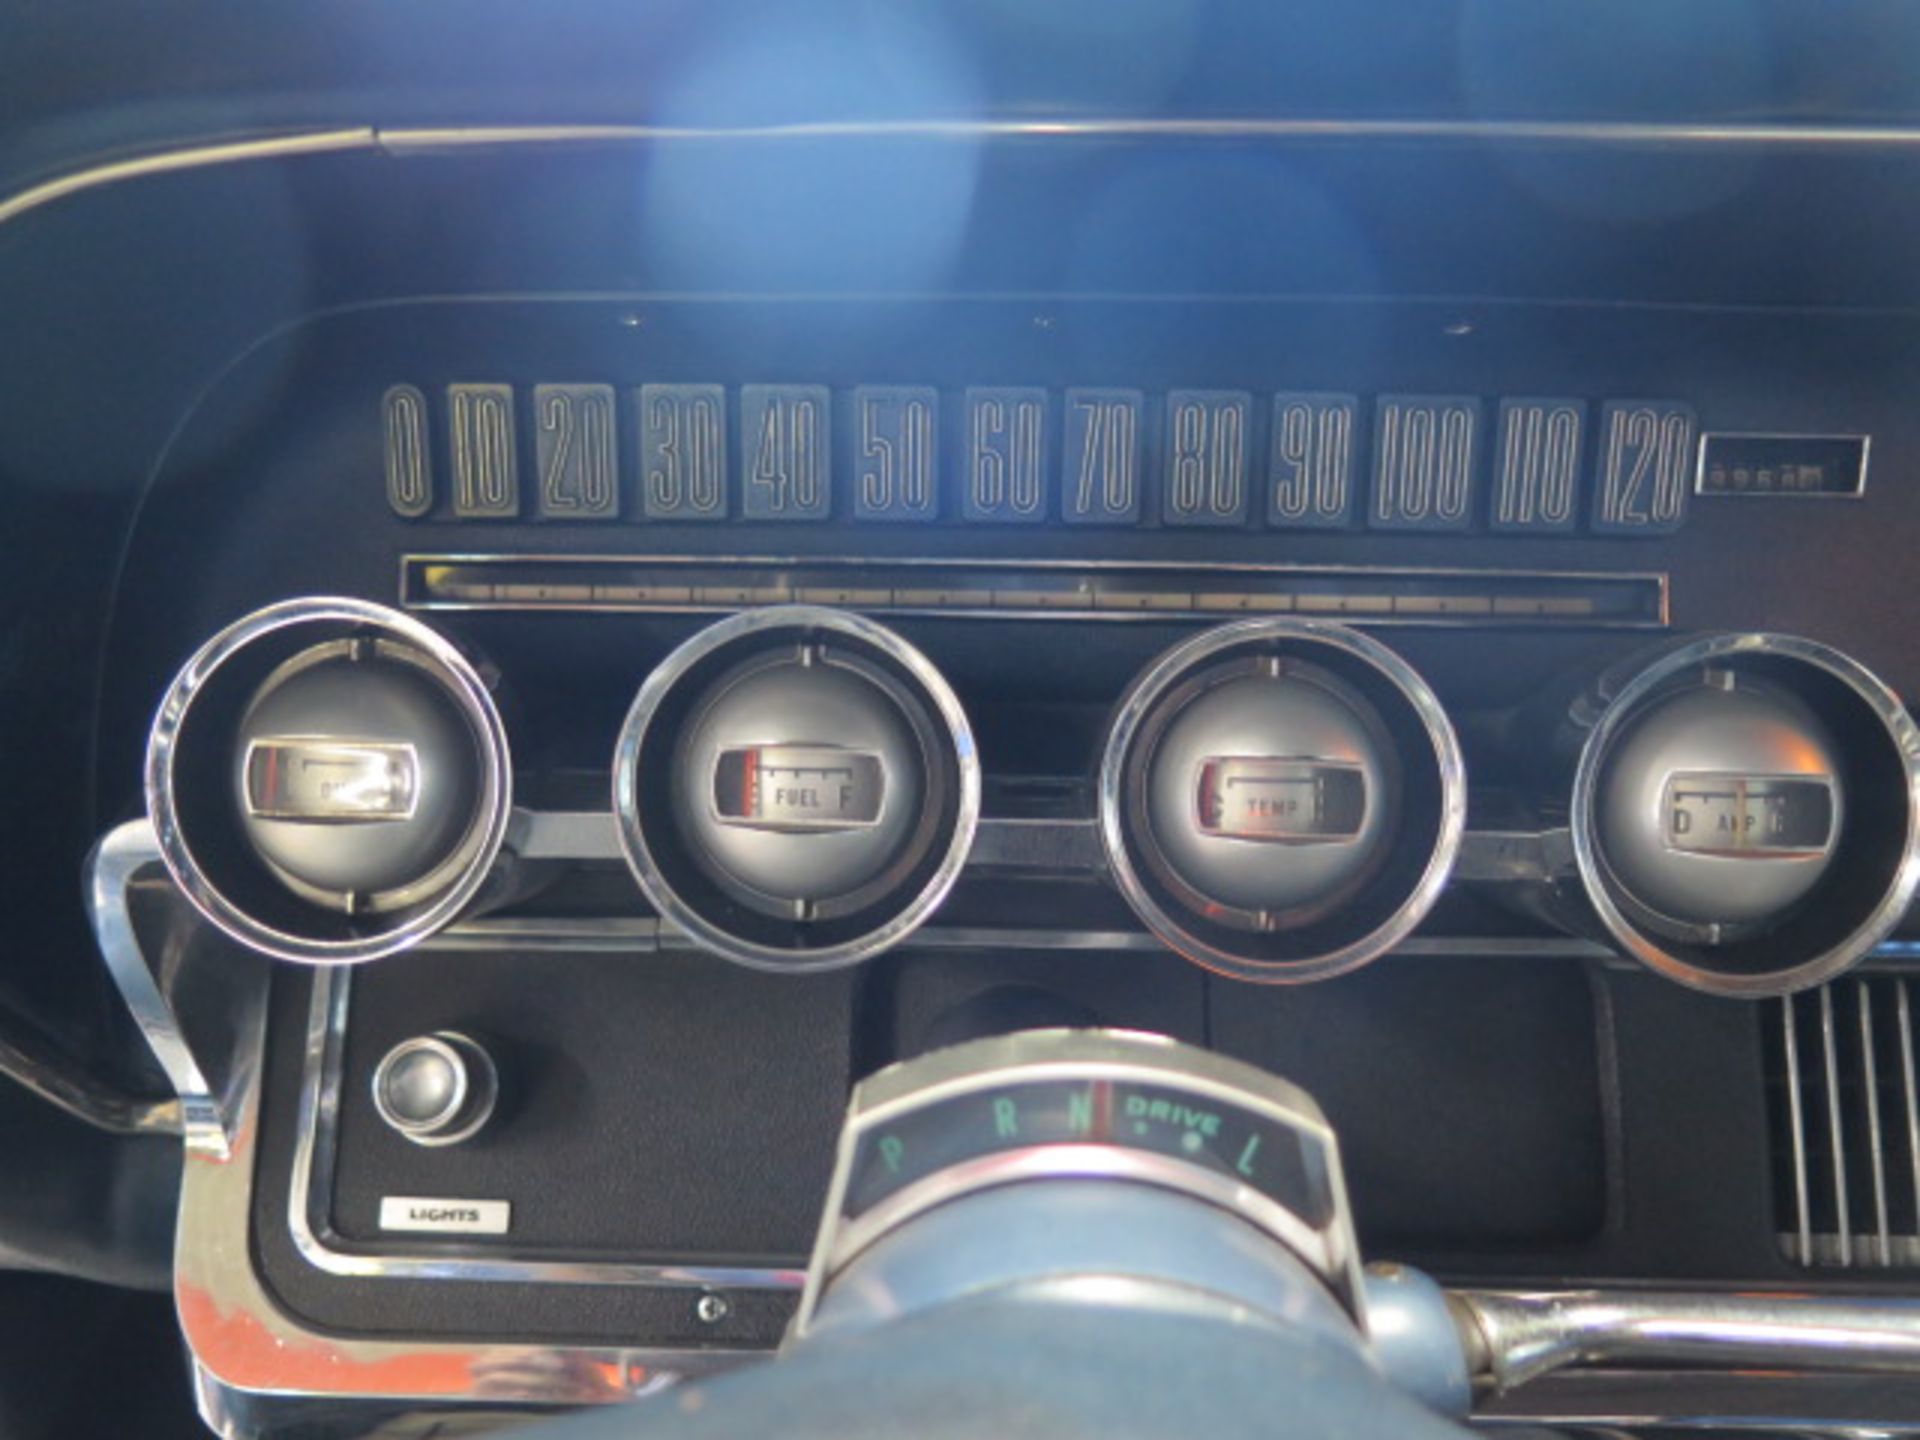 1966 Ford Thunderbird Convertible, Rare Q Code 428 w/ 3x2 Carburetors. (SOLD AS-IS - NO WARRANTY) - Image 8 of 45